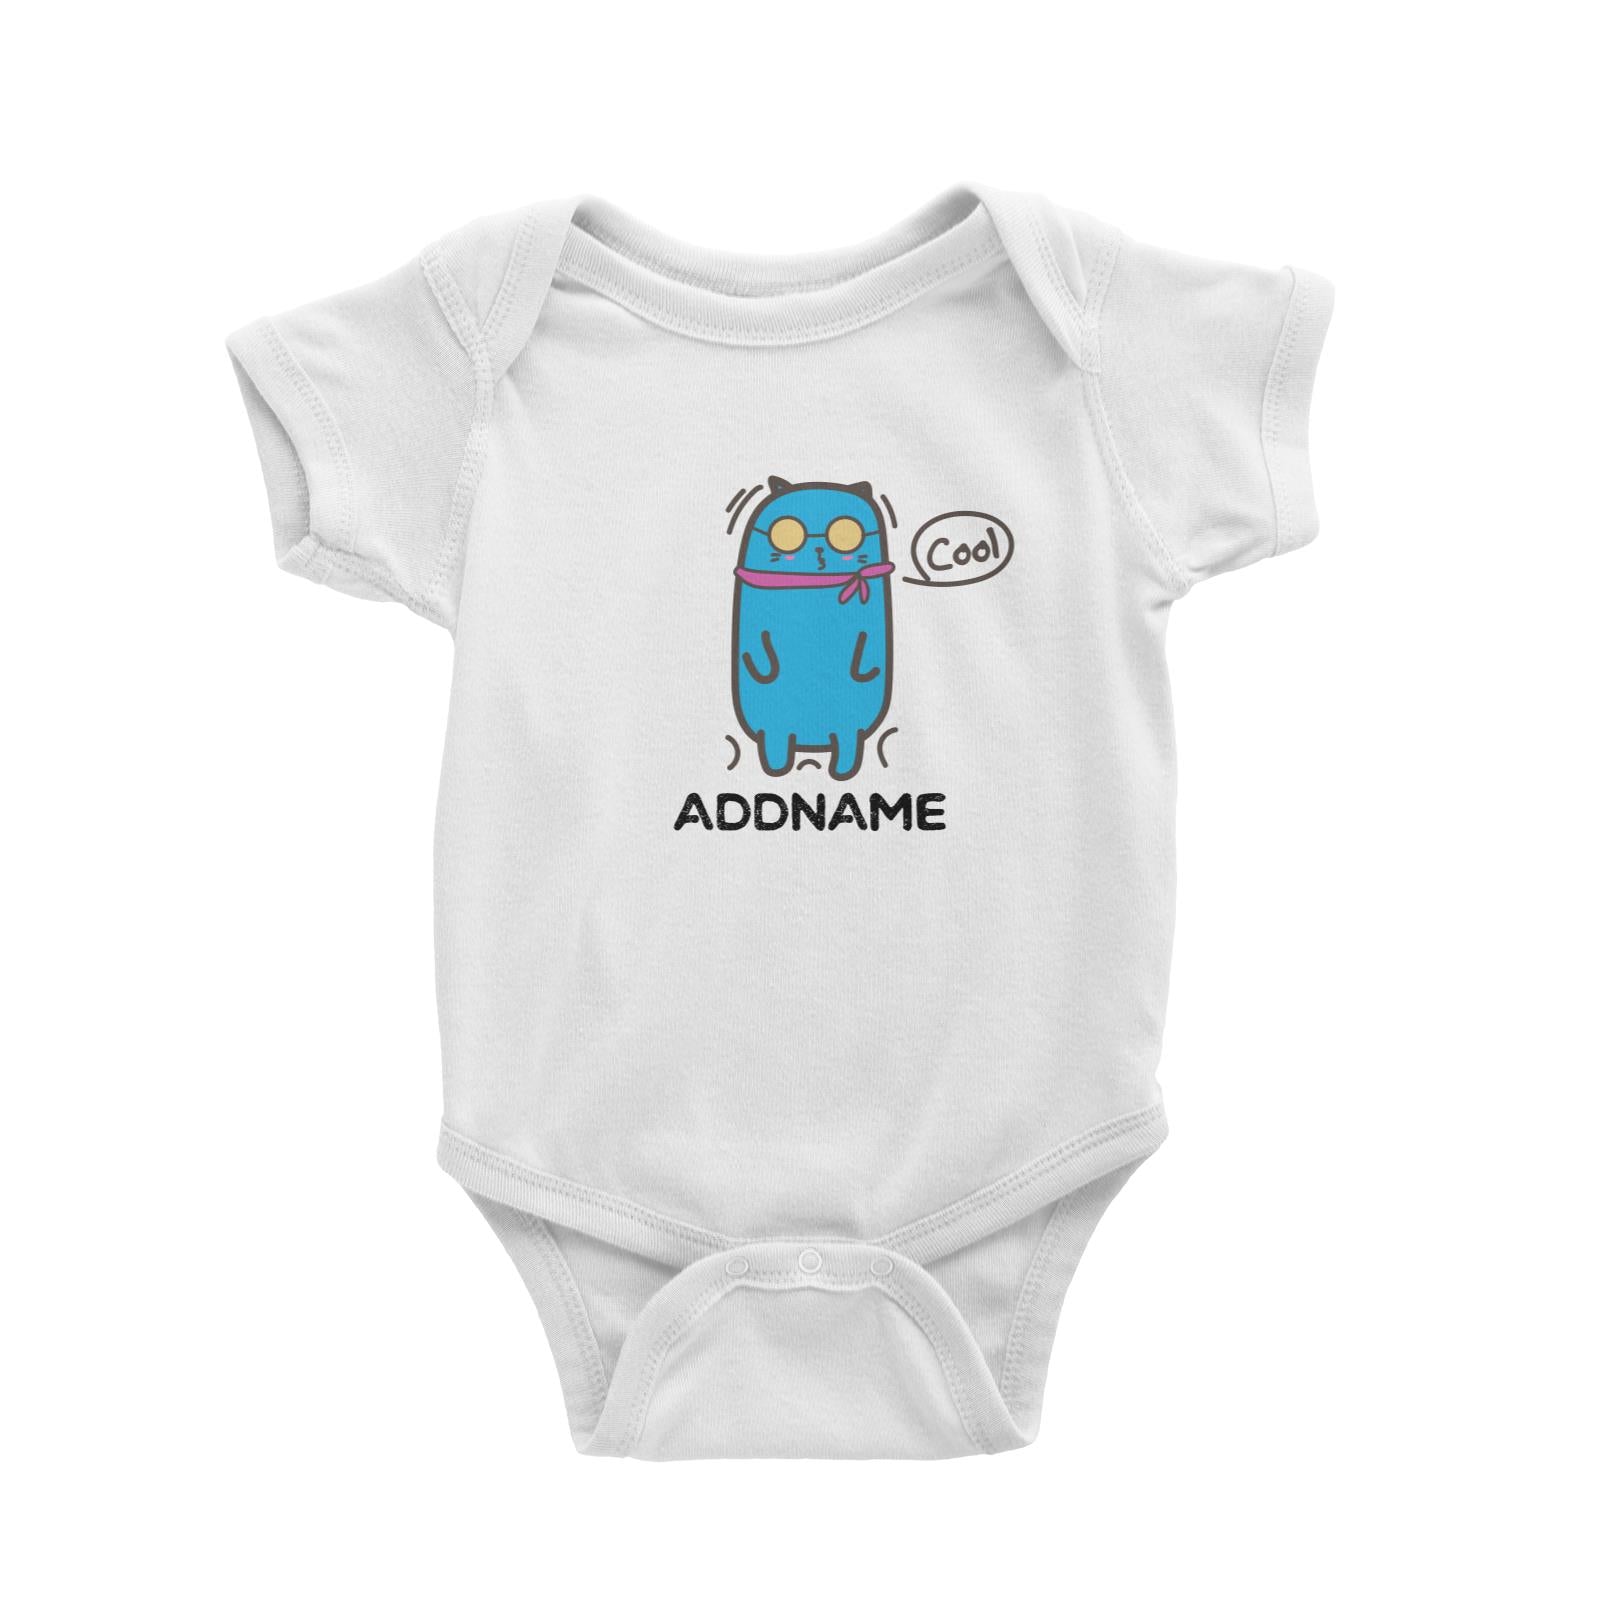 Cute Animals And Friends Series Cool Blue Cat With Sunglasses Addname Baby Romper